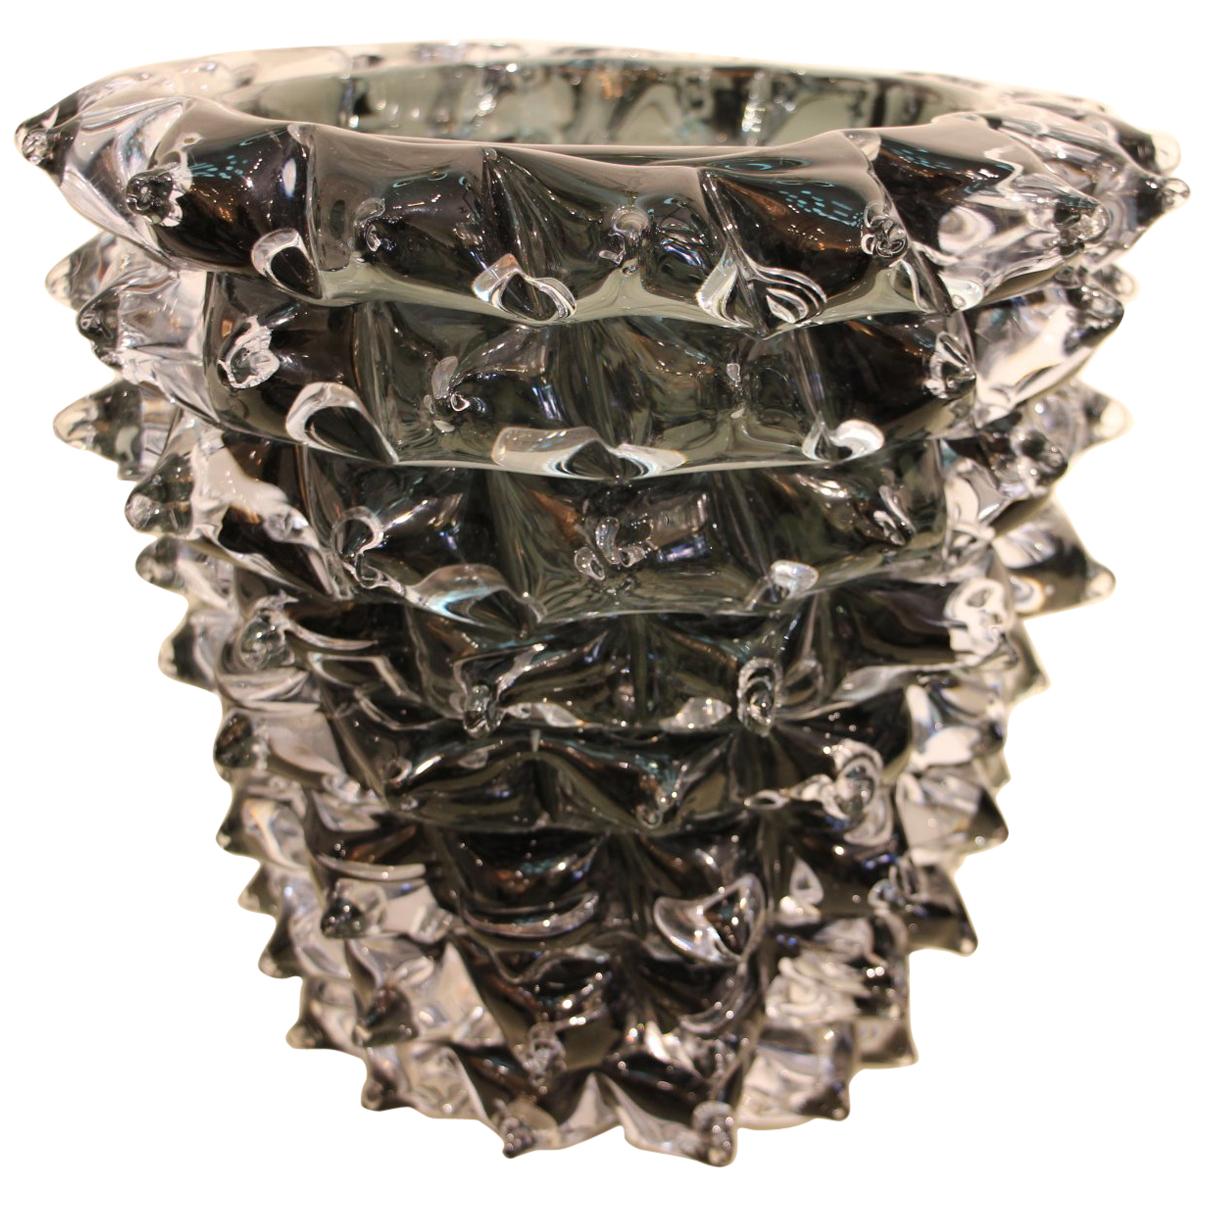 Black Vase in Murano Glass with Spikes Decor, Barovier Style, Rostrato